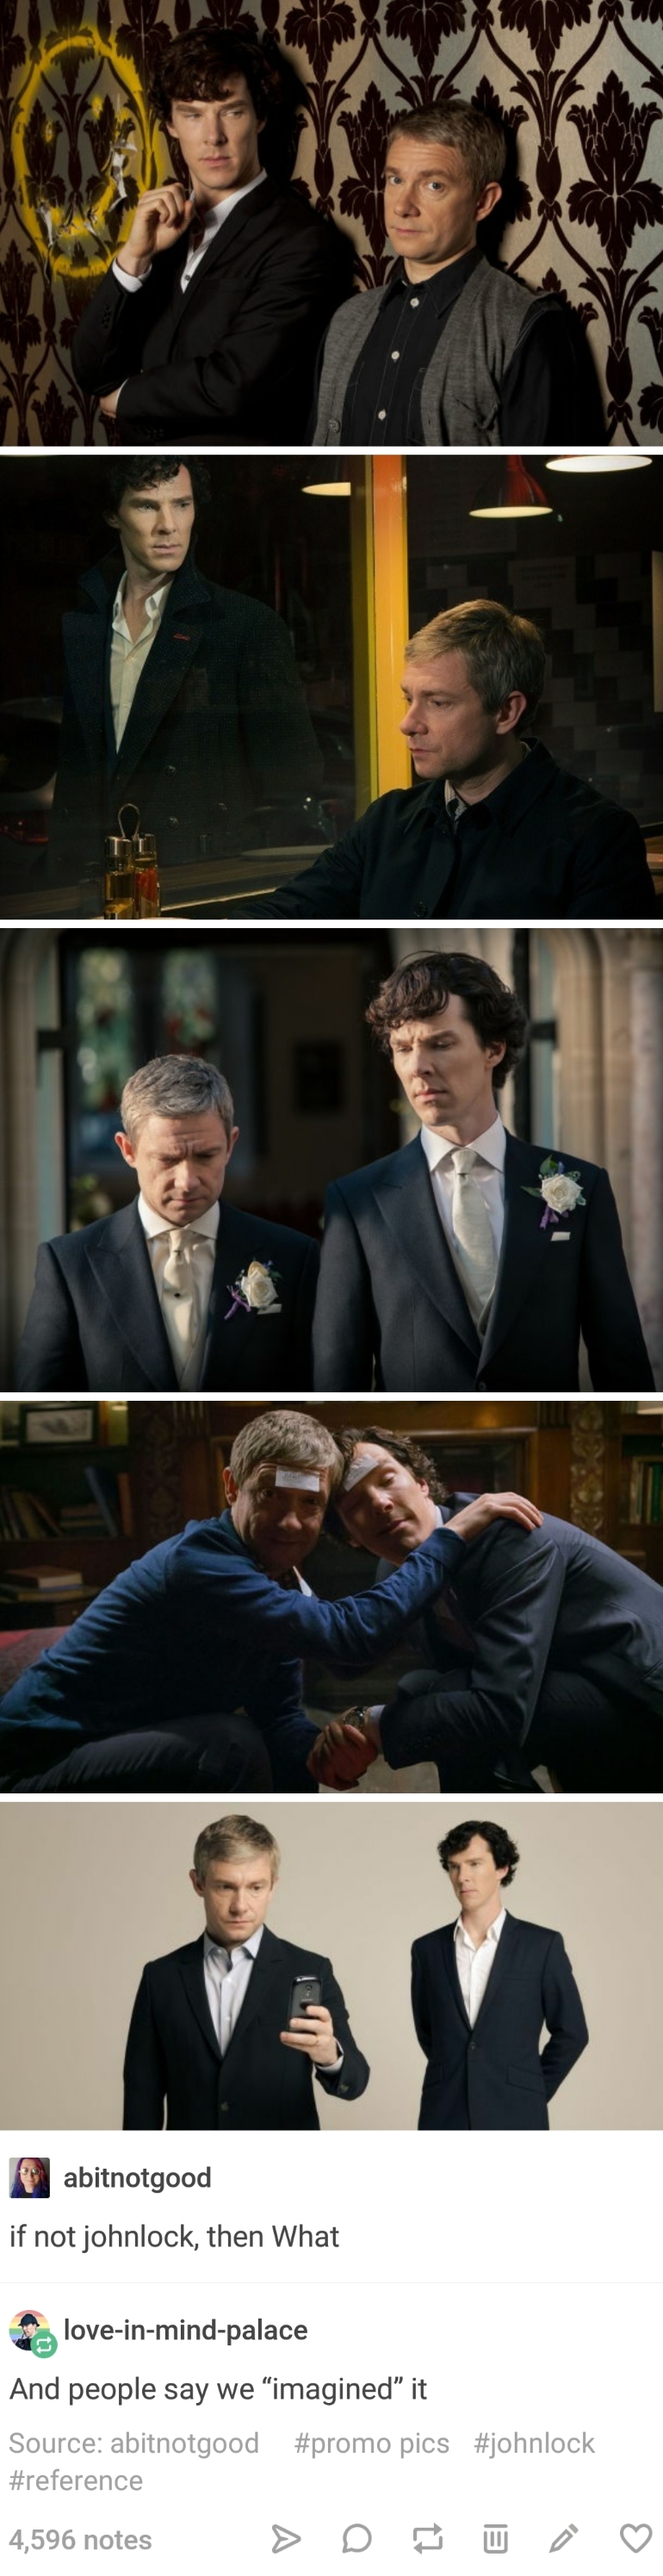 Photo set of 5 color images of Sherlock and Watson. Bottom panel: abitnotgood writes, 'if not johnlock, then What.' love-in-mind-palace responds, 'And people say we 'imagined' it.' Links under comments read: Source: abitnotgood #promo pics #johnlock #reference.